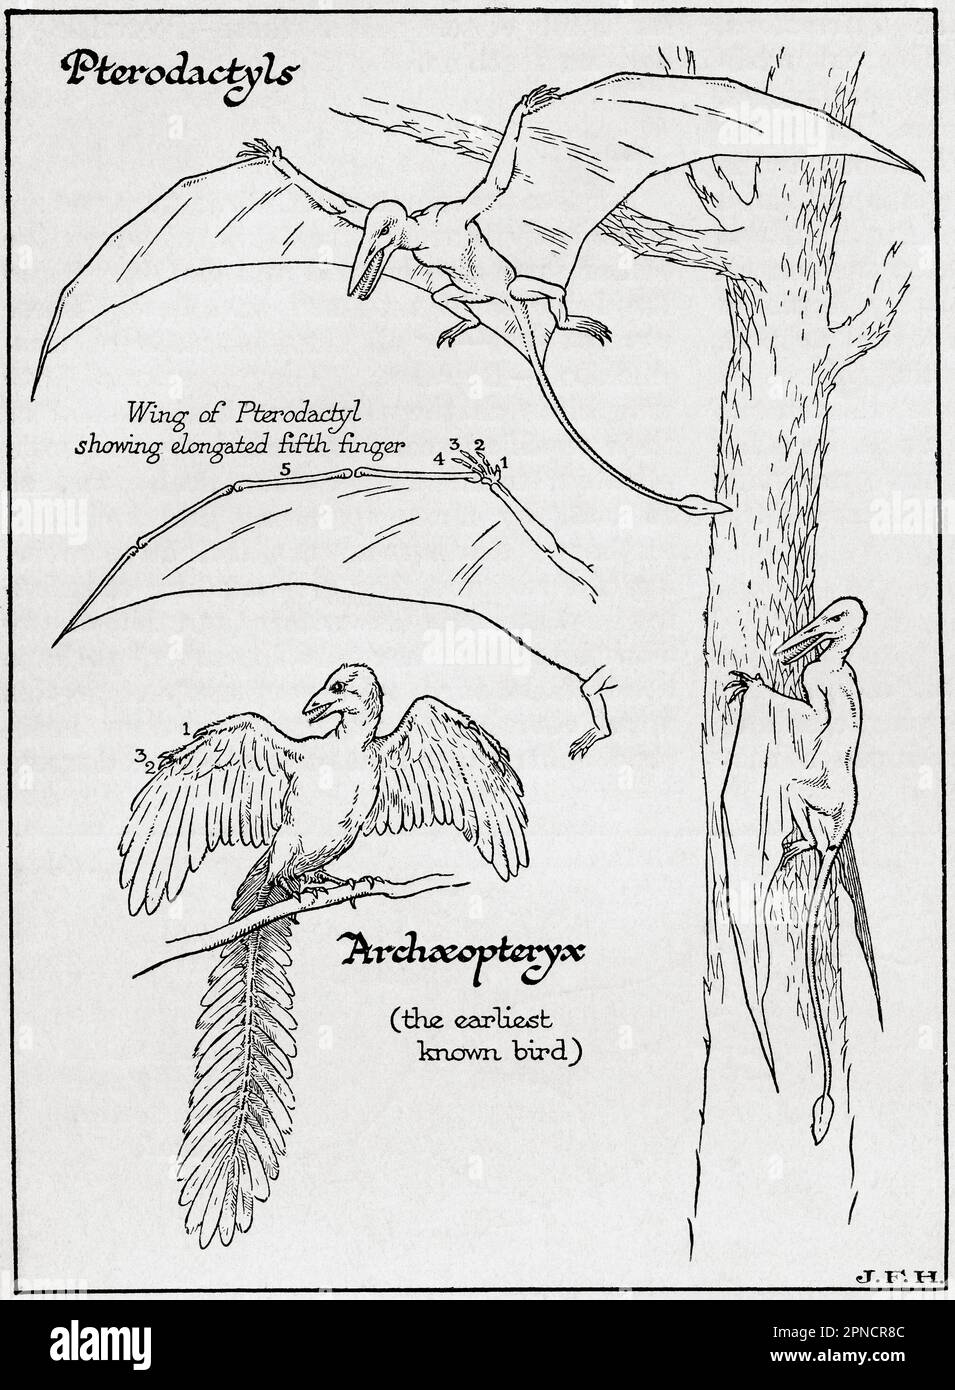 Diagram of a Pterodactyl, its wing showing the elongated 5th finger and an Archaeopteryx.  From the book Outline of History by H.G. Wells, published 1920. Stock Photo